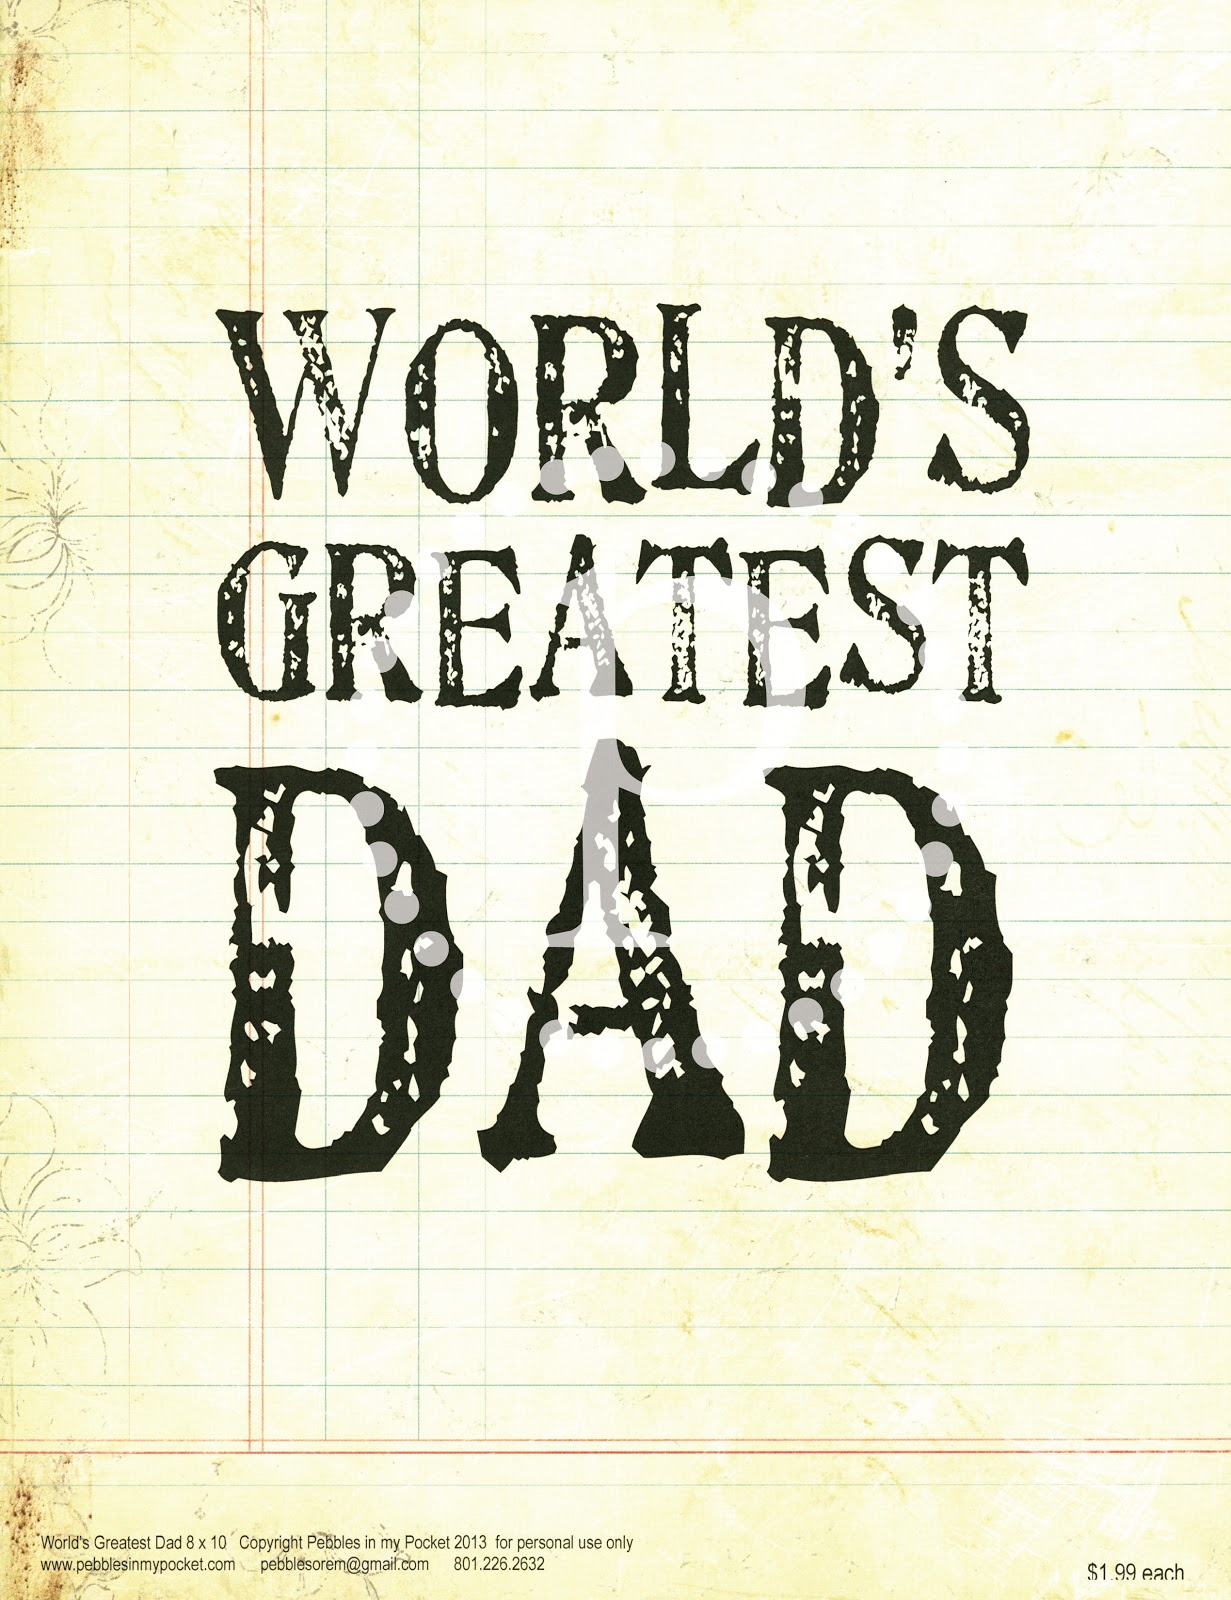 Greatest dad lyrics. Fathers Day quotes. Hels Greatest dad. My dad is. Best dad!.